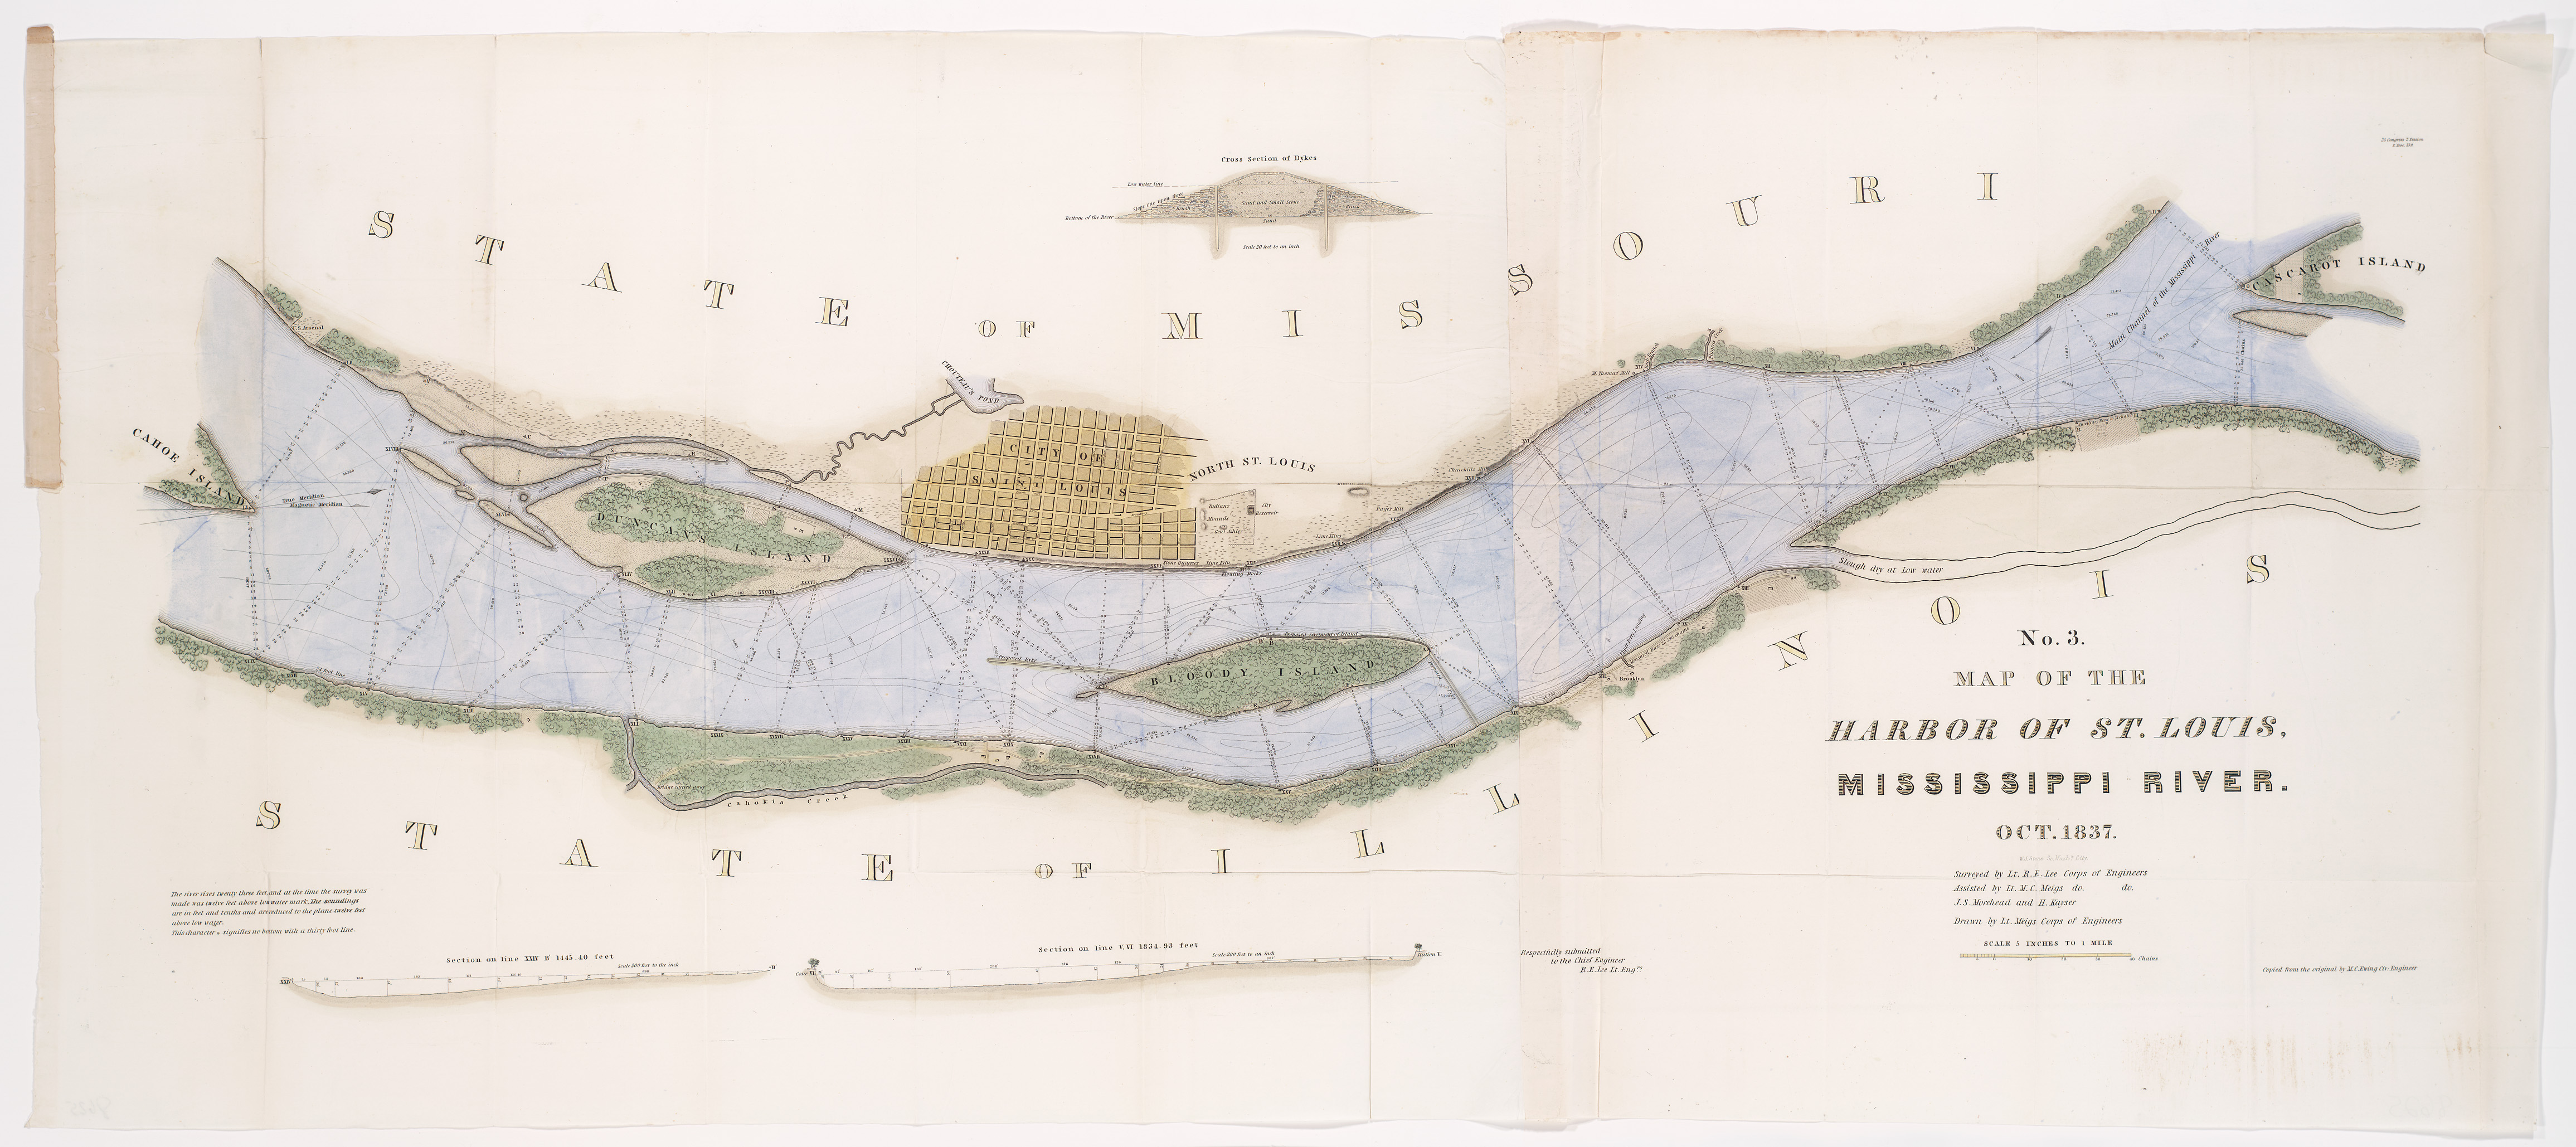 The 1838 map of the harbor of St. Louis 